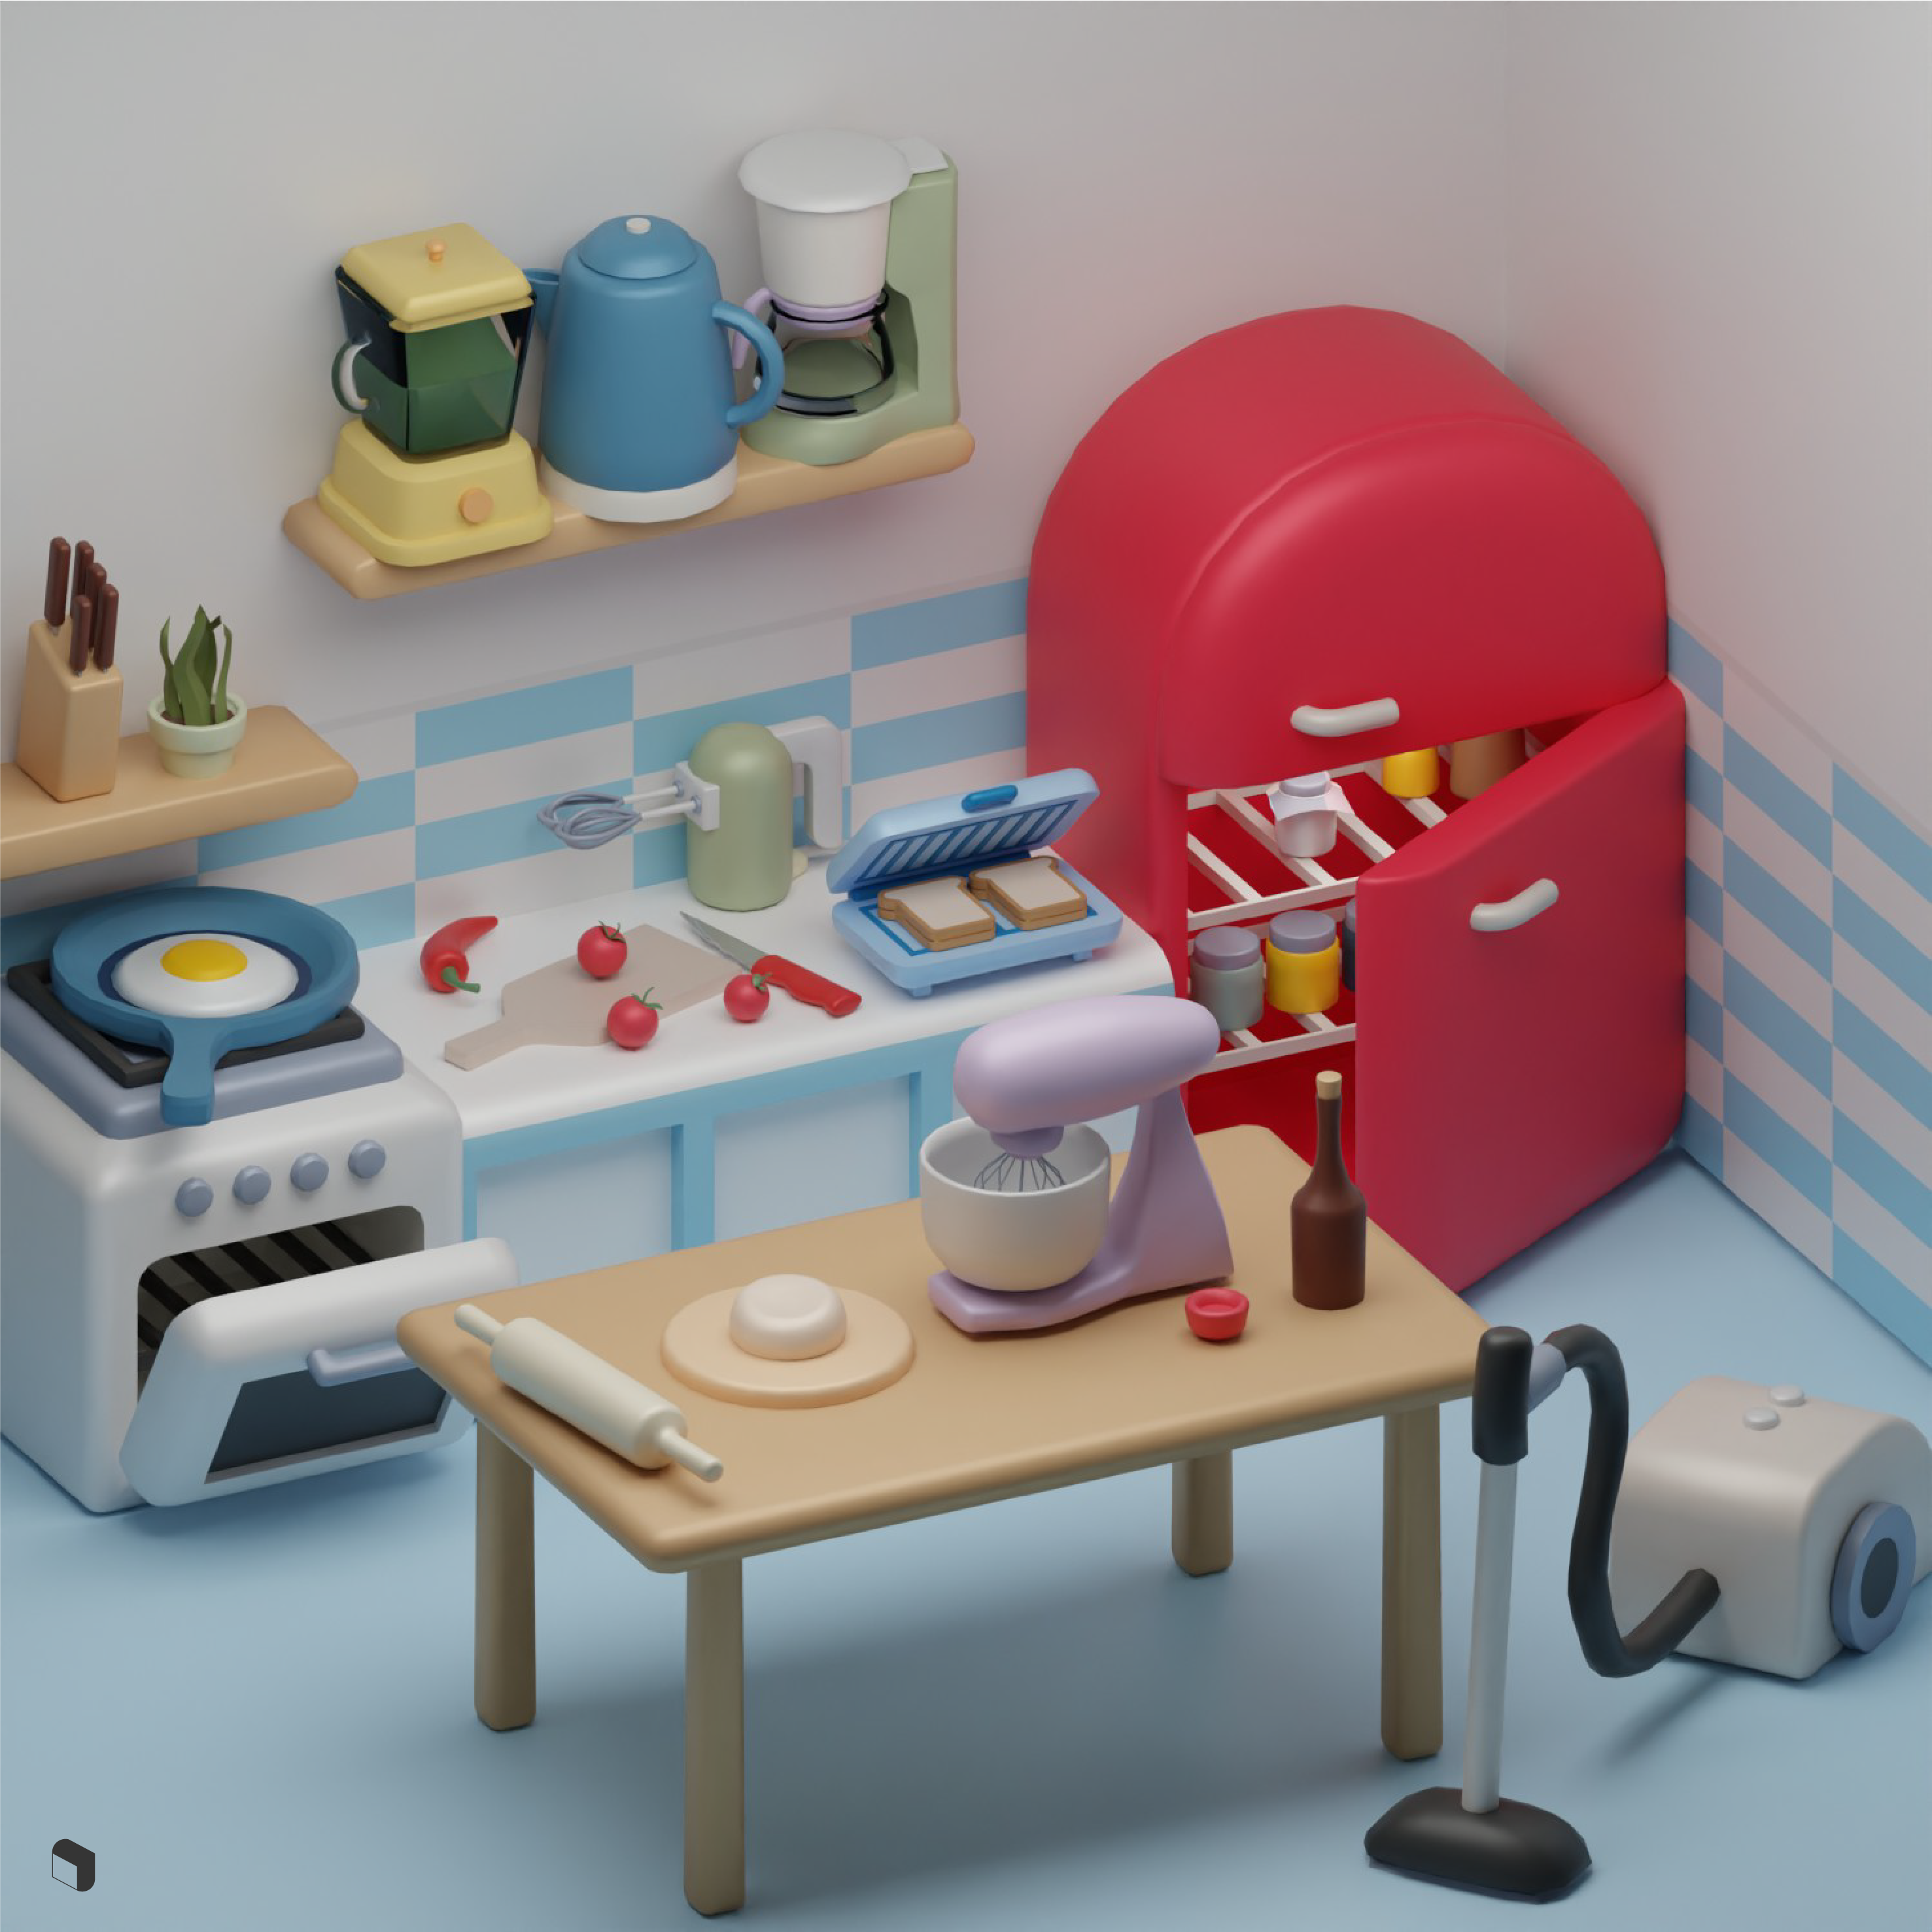 3D Model Low Poly Home Appliance PNG - Toffu Co